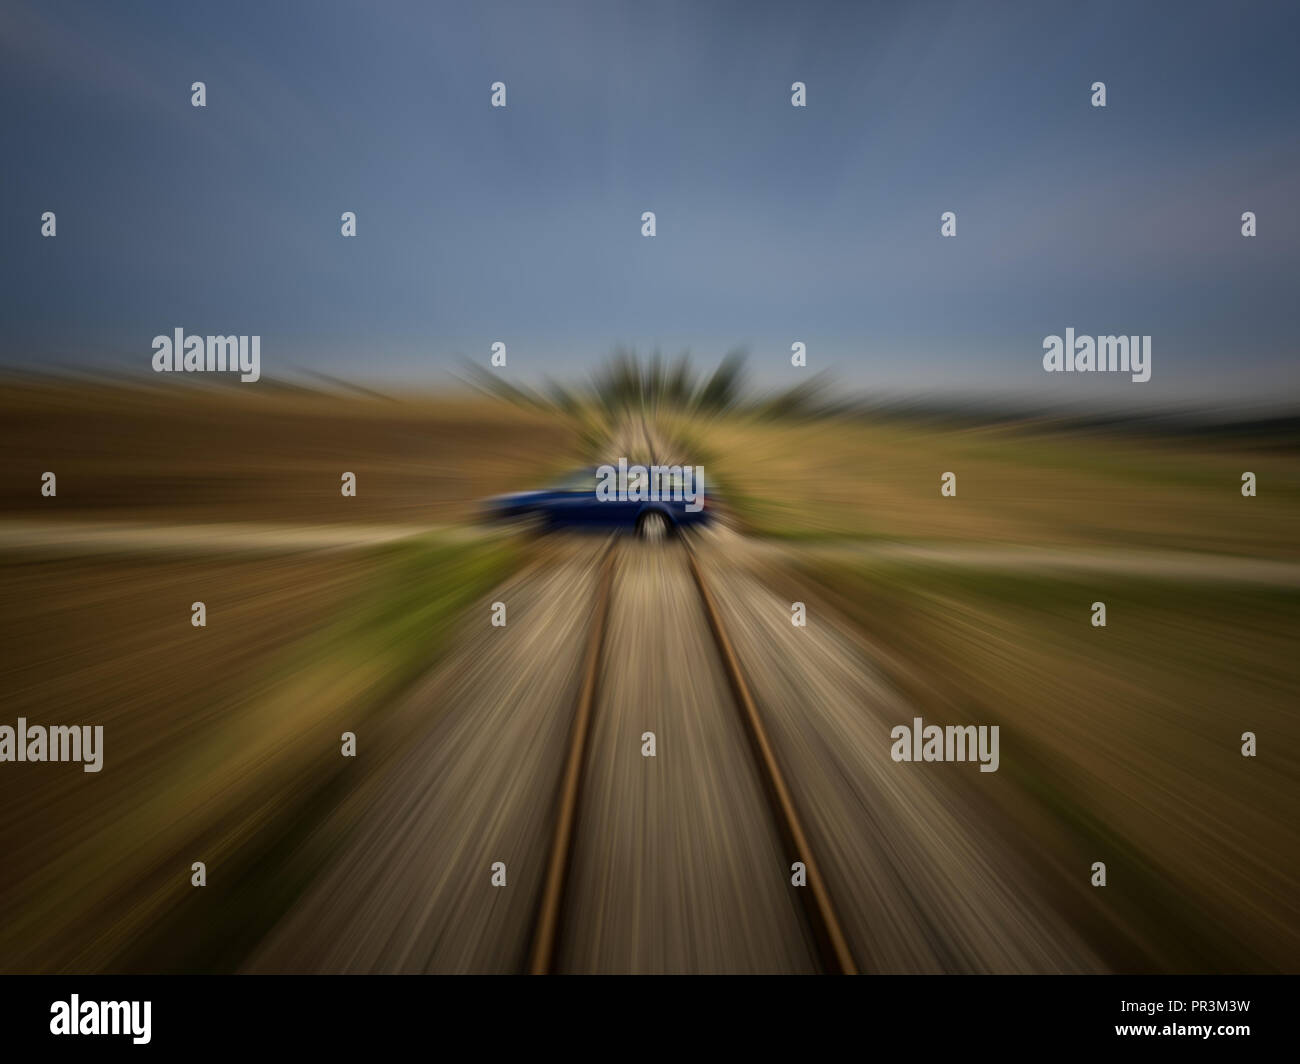 Train perspective of a car passing a railroad crossing with strong motion blur Stock Photo